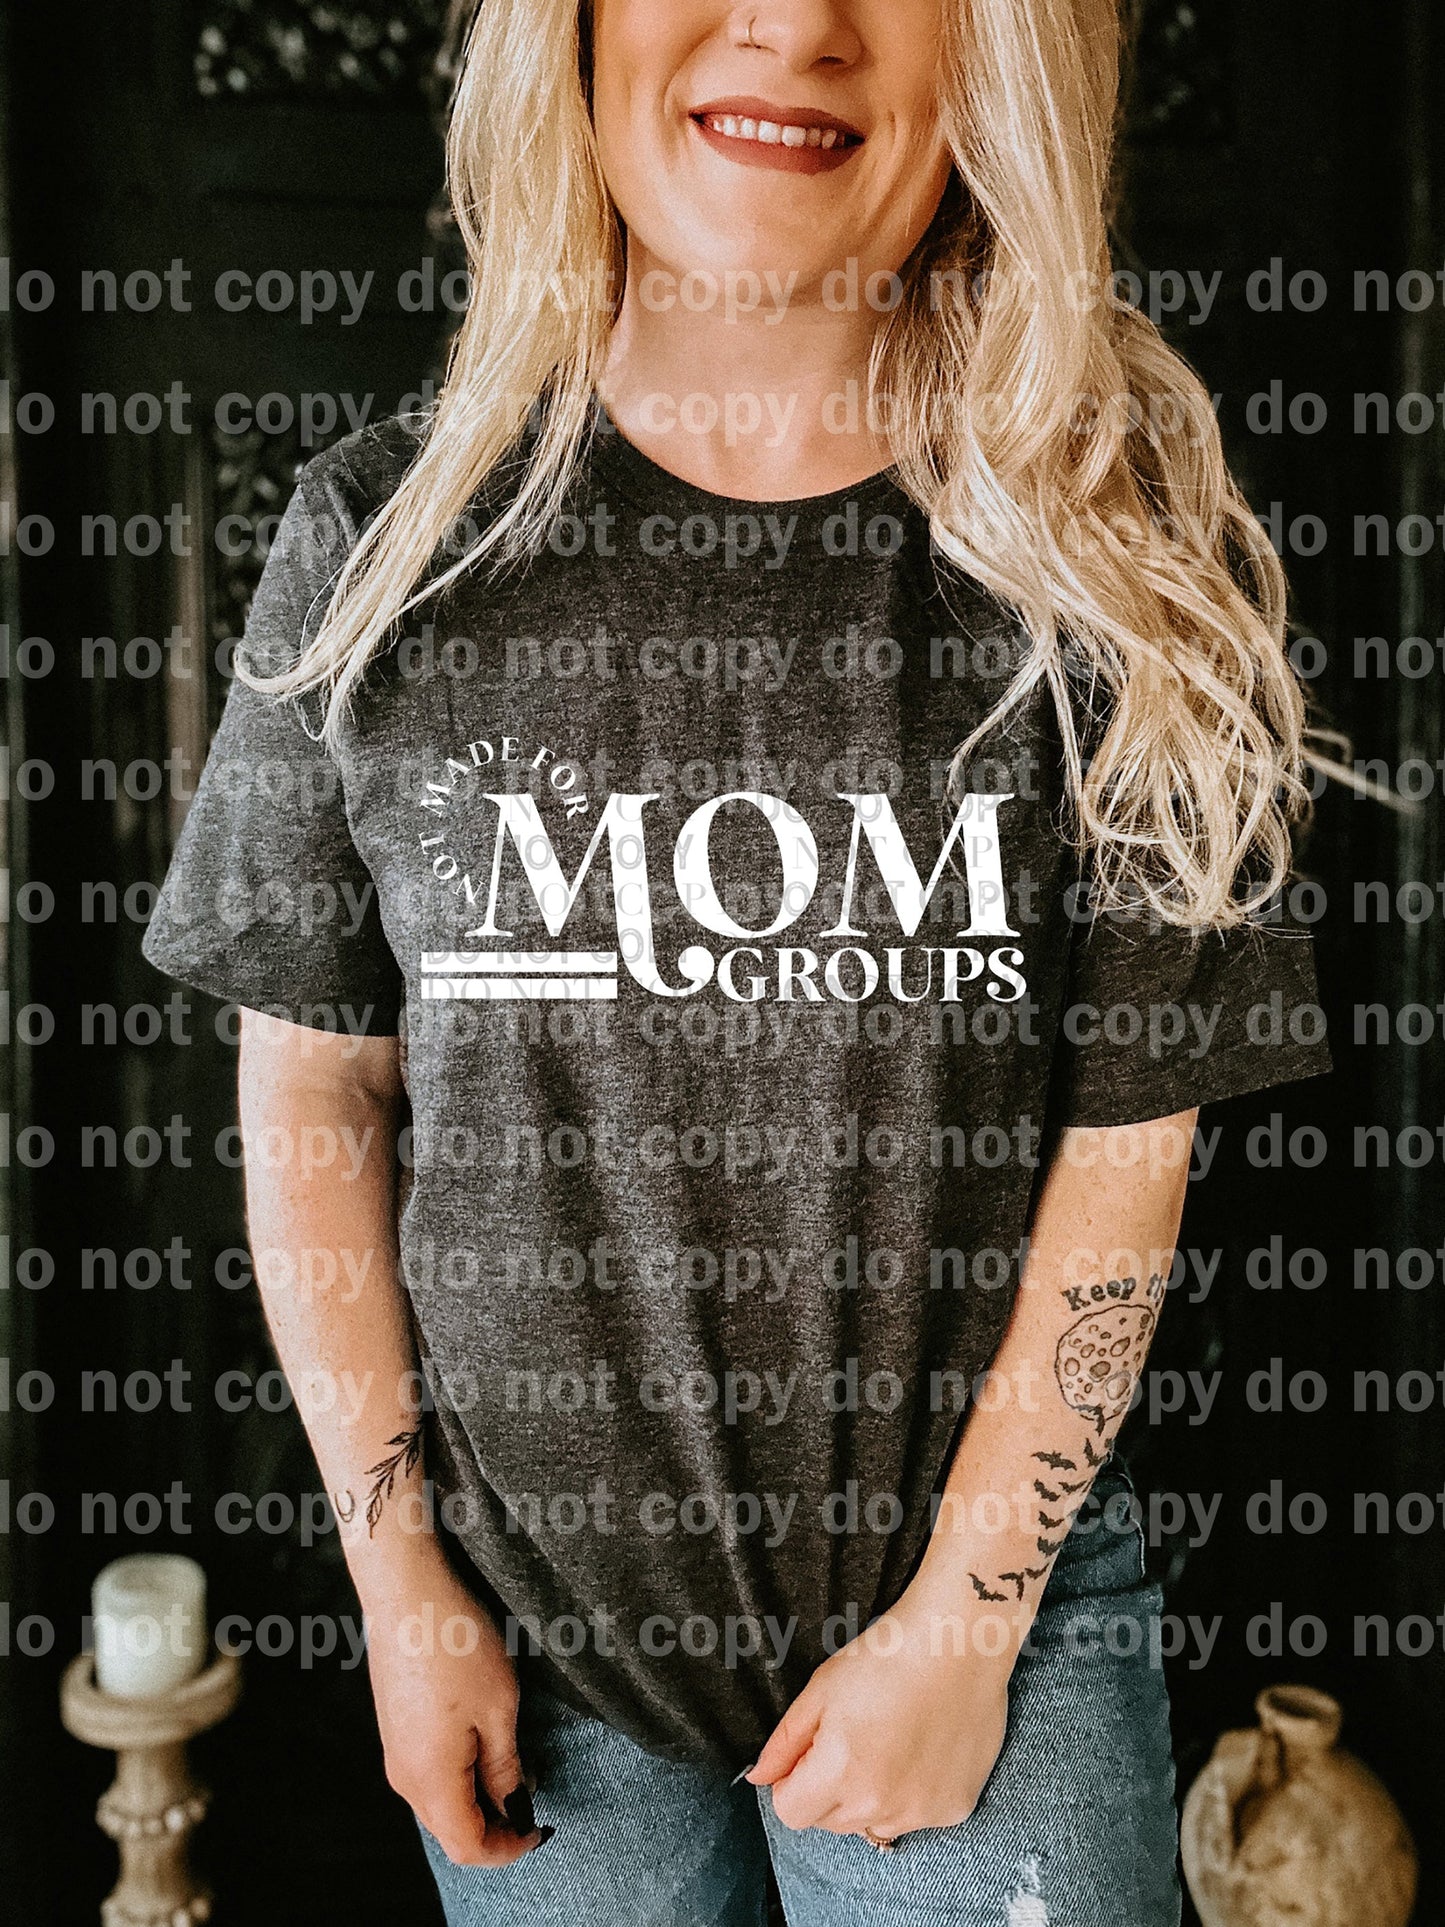 Not Made For Mom Groups Black/White Dream Print or Sublimation Print